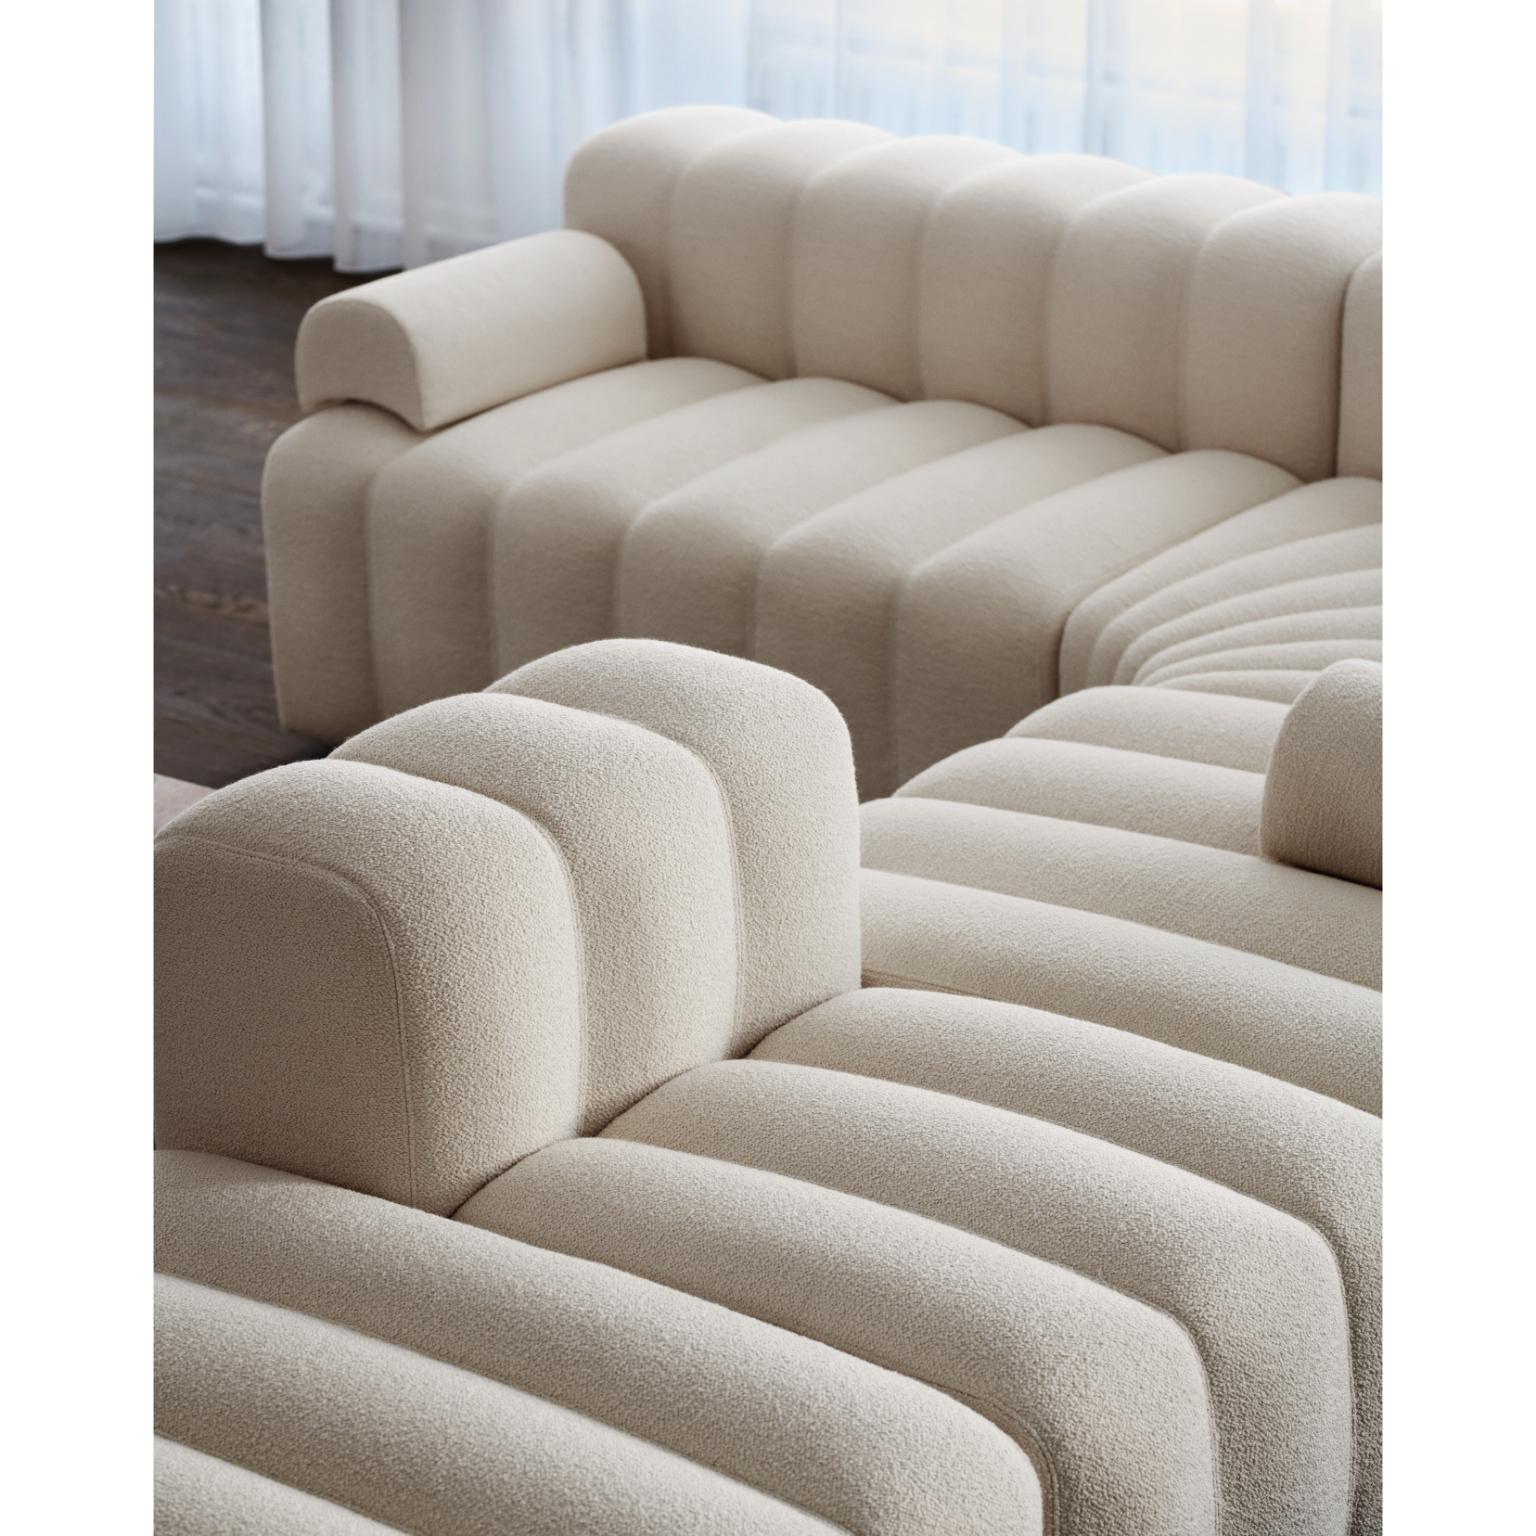 Studio Lounge Small Left Modular Sofa With Armrest by NORR11
Dimensions: D 130 x W 93 x H 70 cm. SH 47 cm. 
Materials: Foam, wood and upholstery.
Upholstery: Barnum Boucle Color 3.

Available in different upholstery options. A plywood structure with